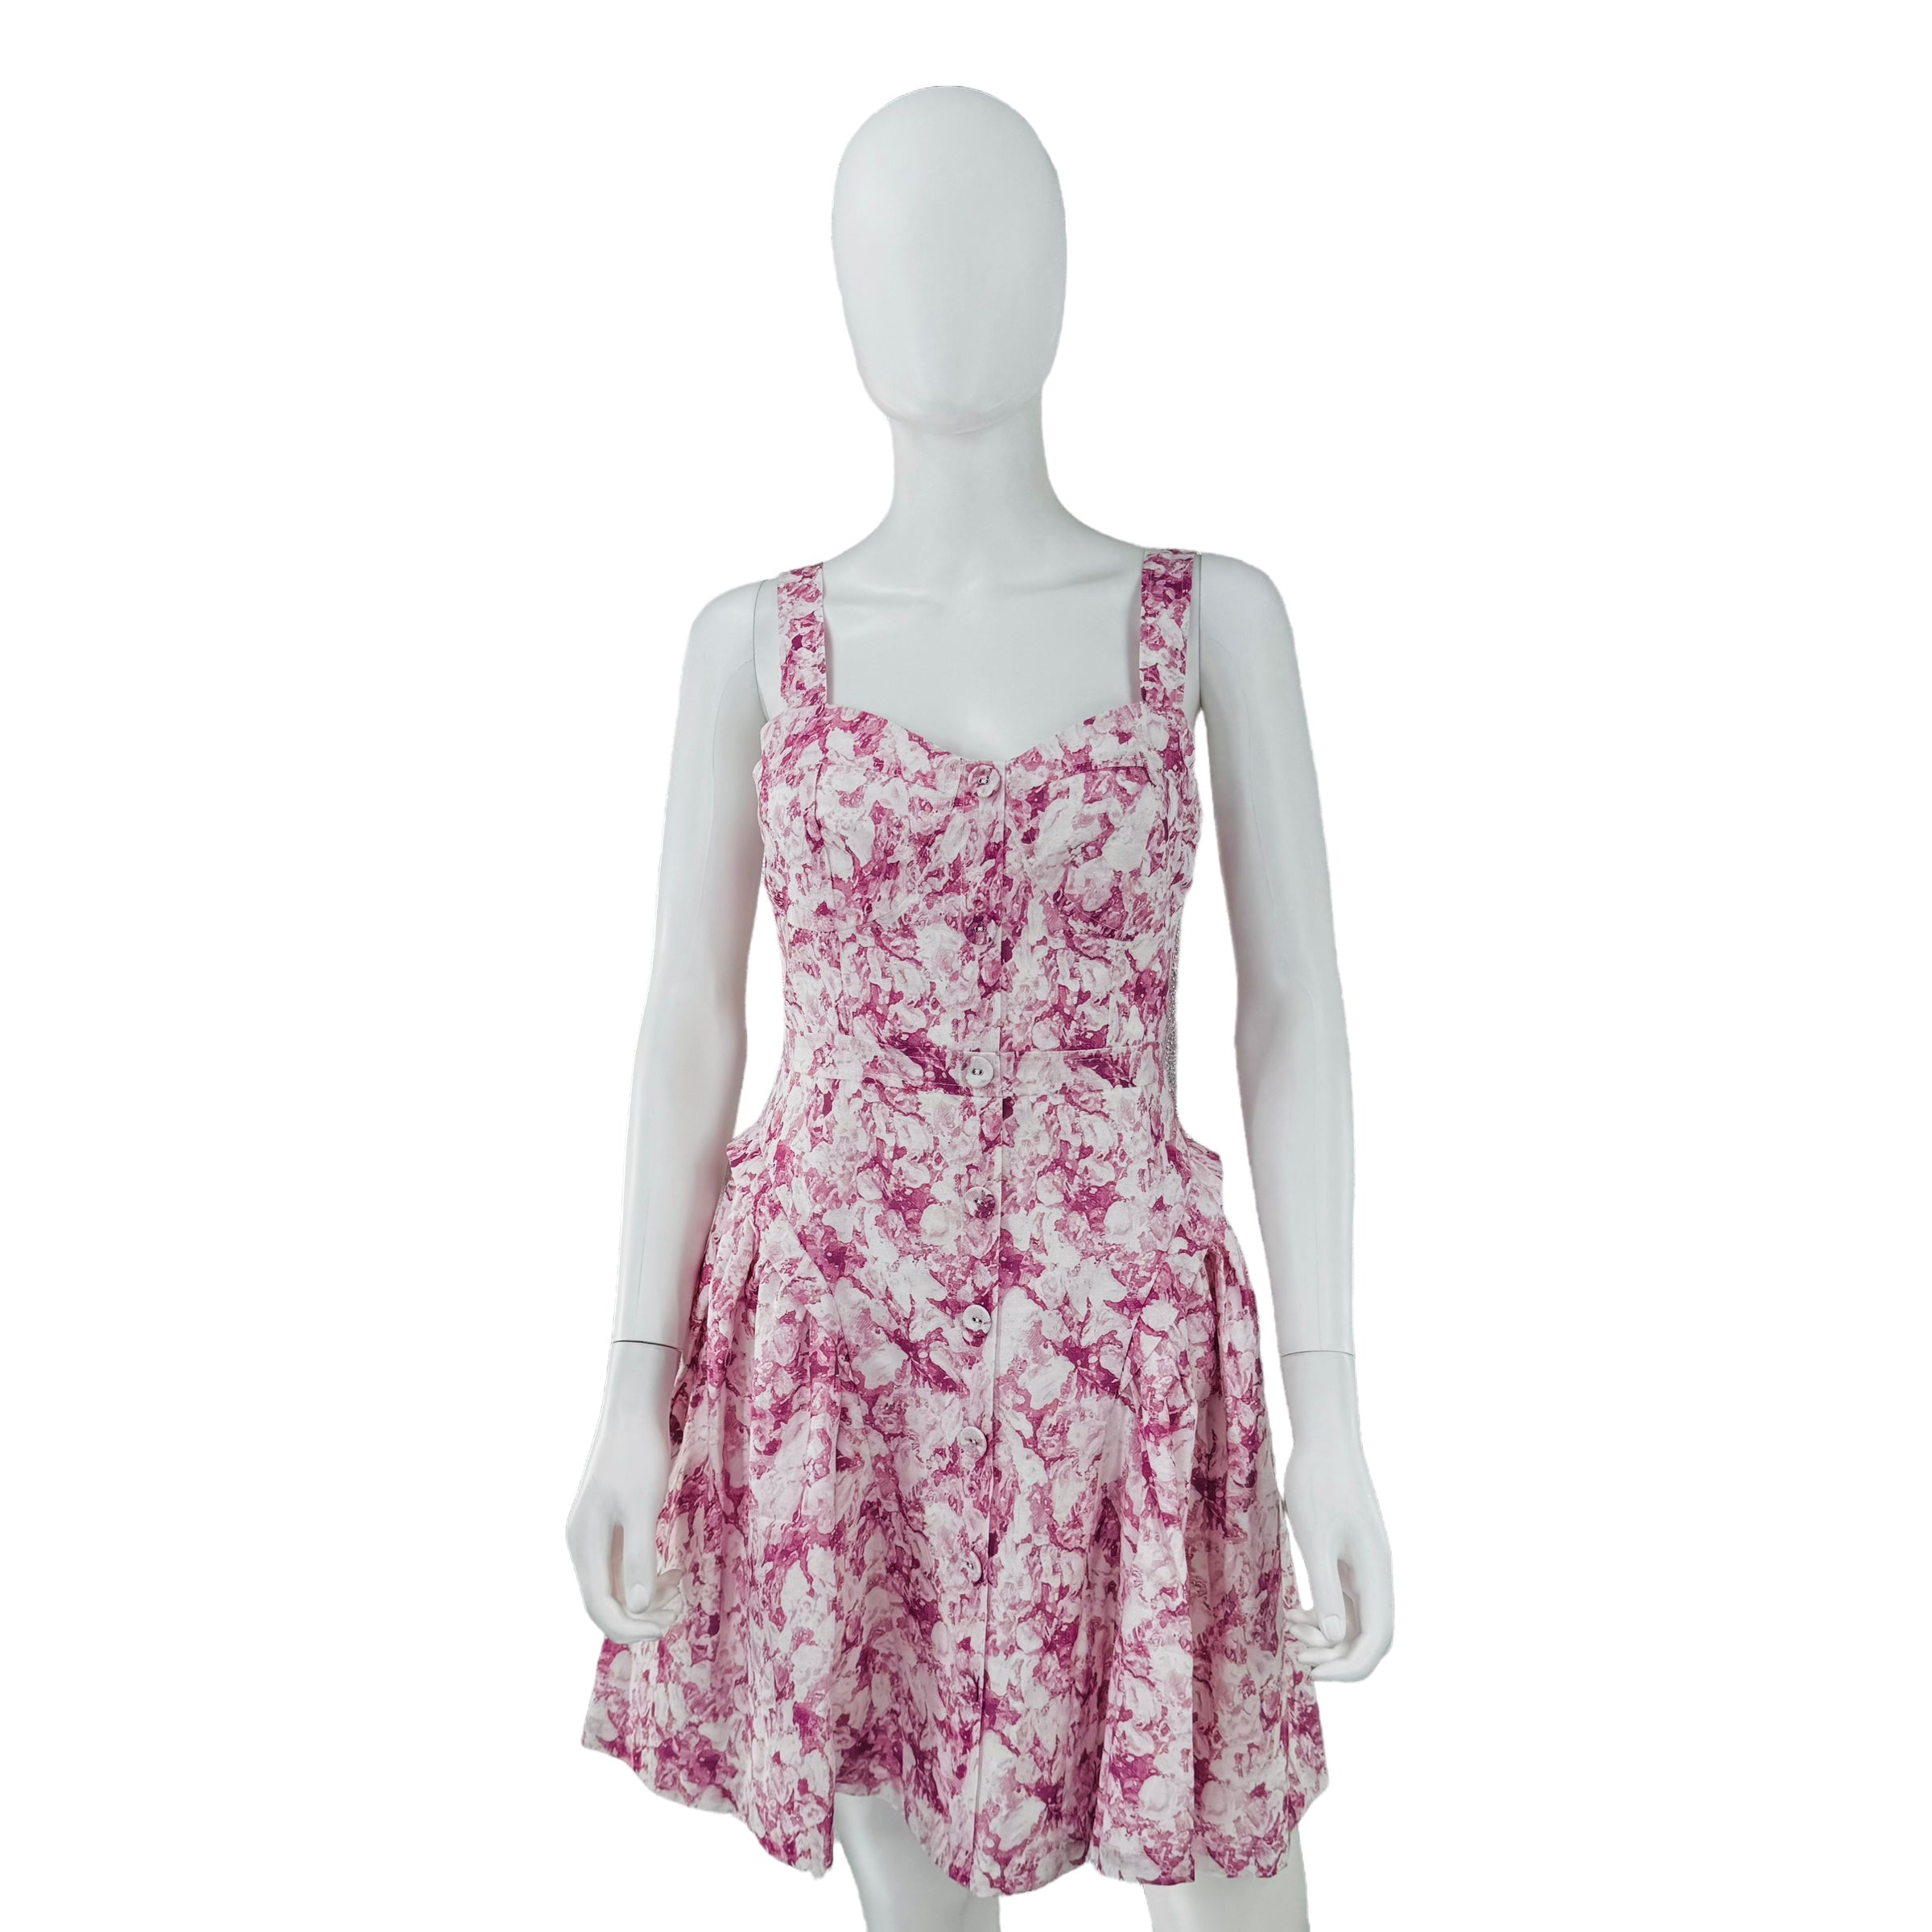 Hyacinth House Pink Abstract Floral Rosemary Drop Waist Mini Dress